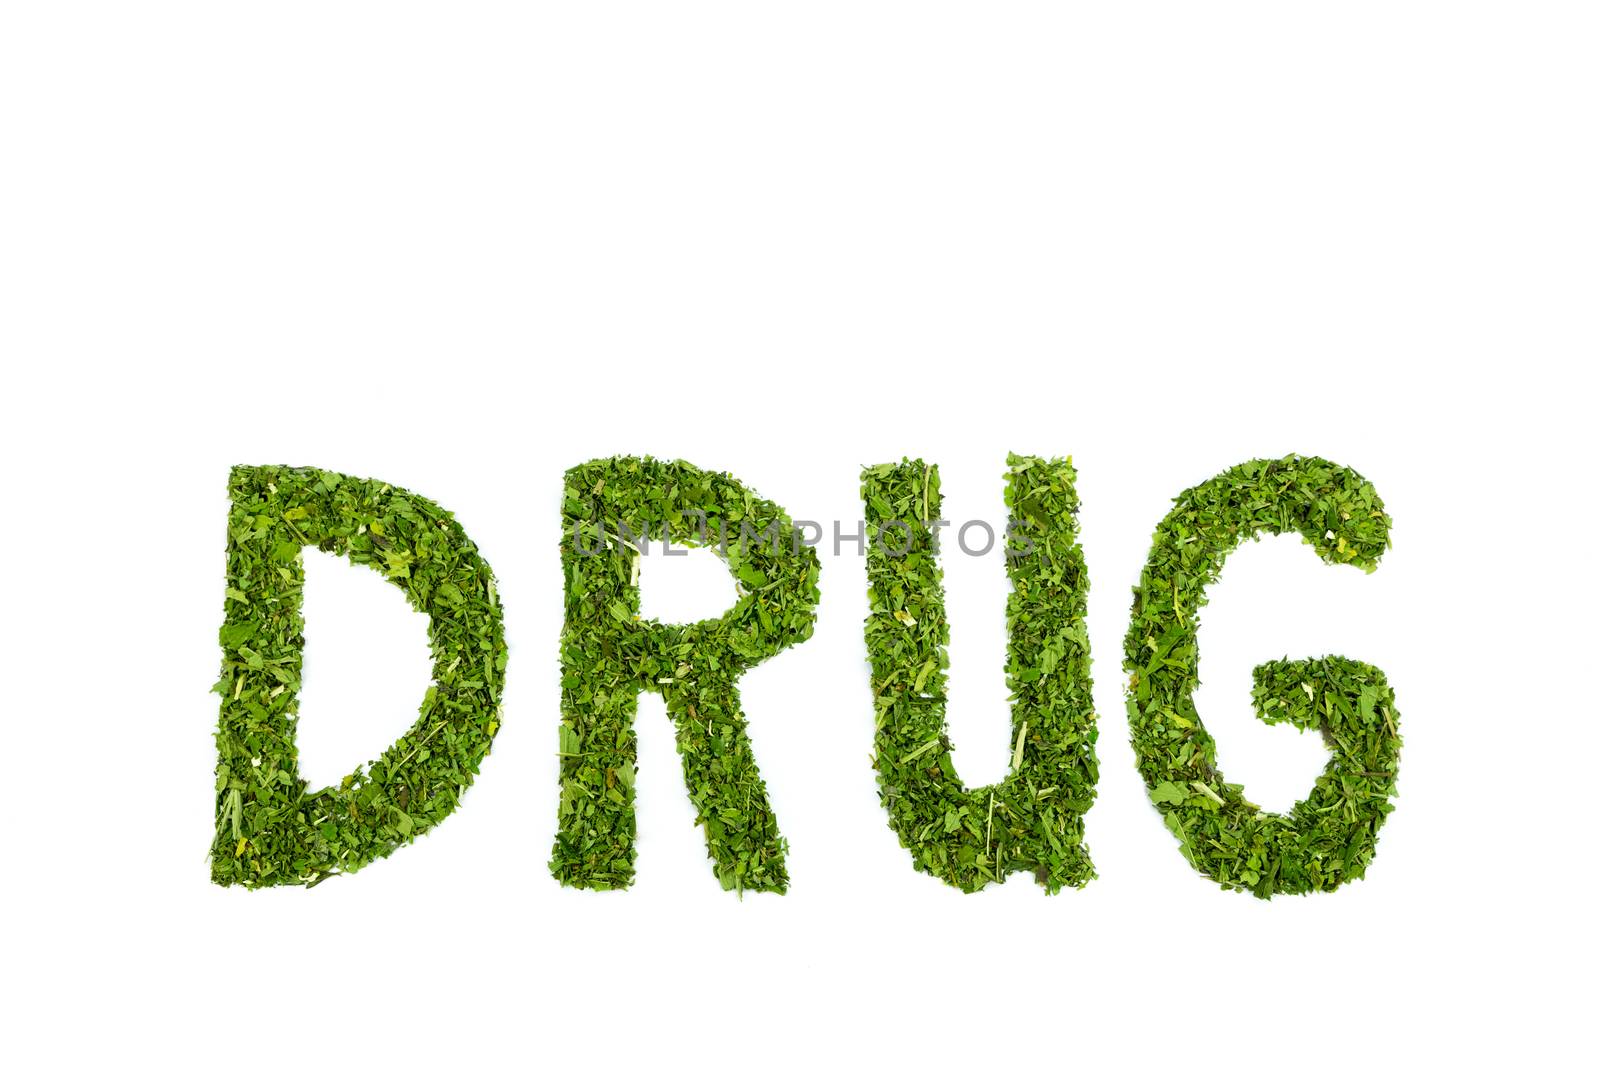 Word DRUG letters made of green hemp leaves isolated on white background